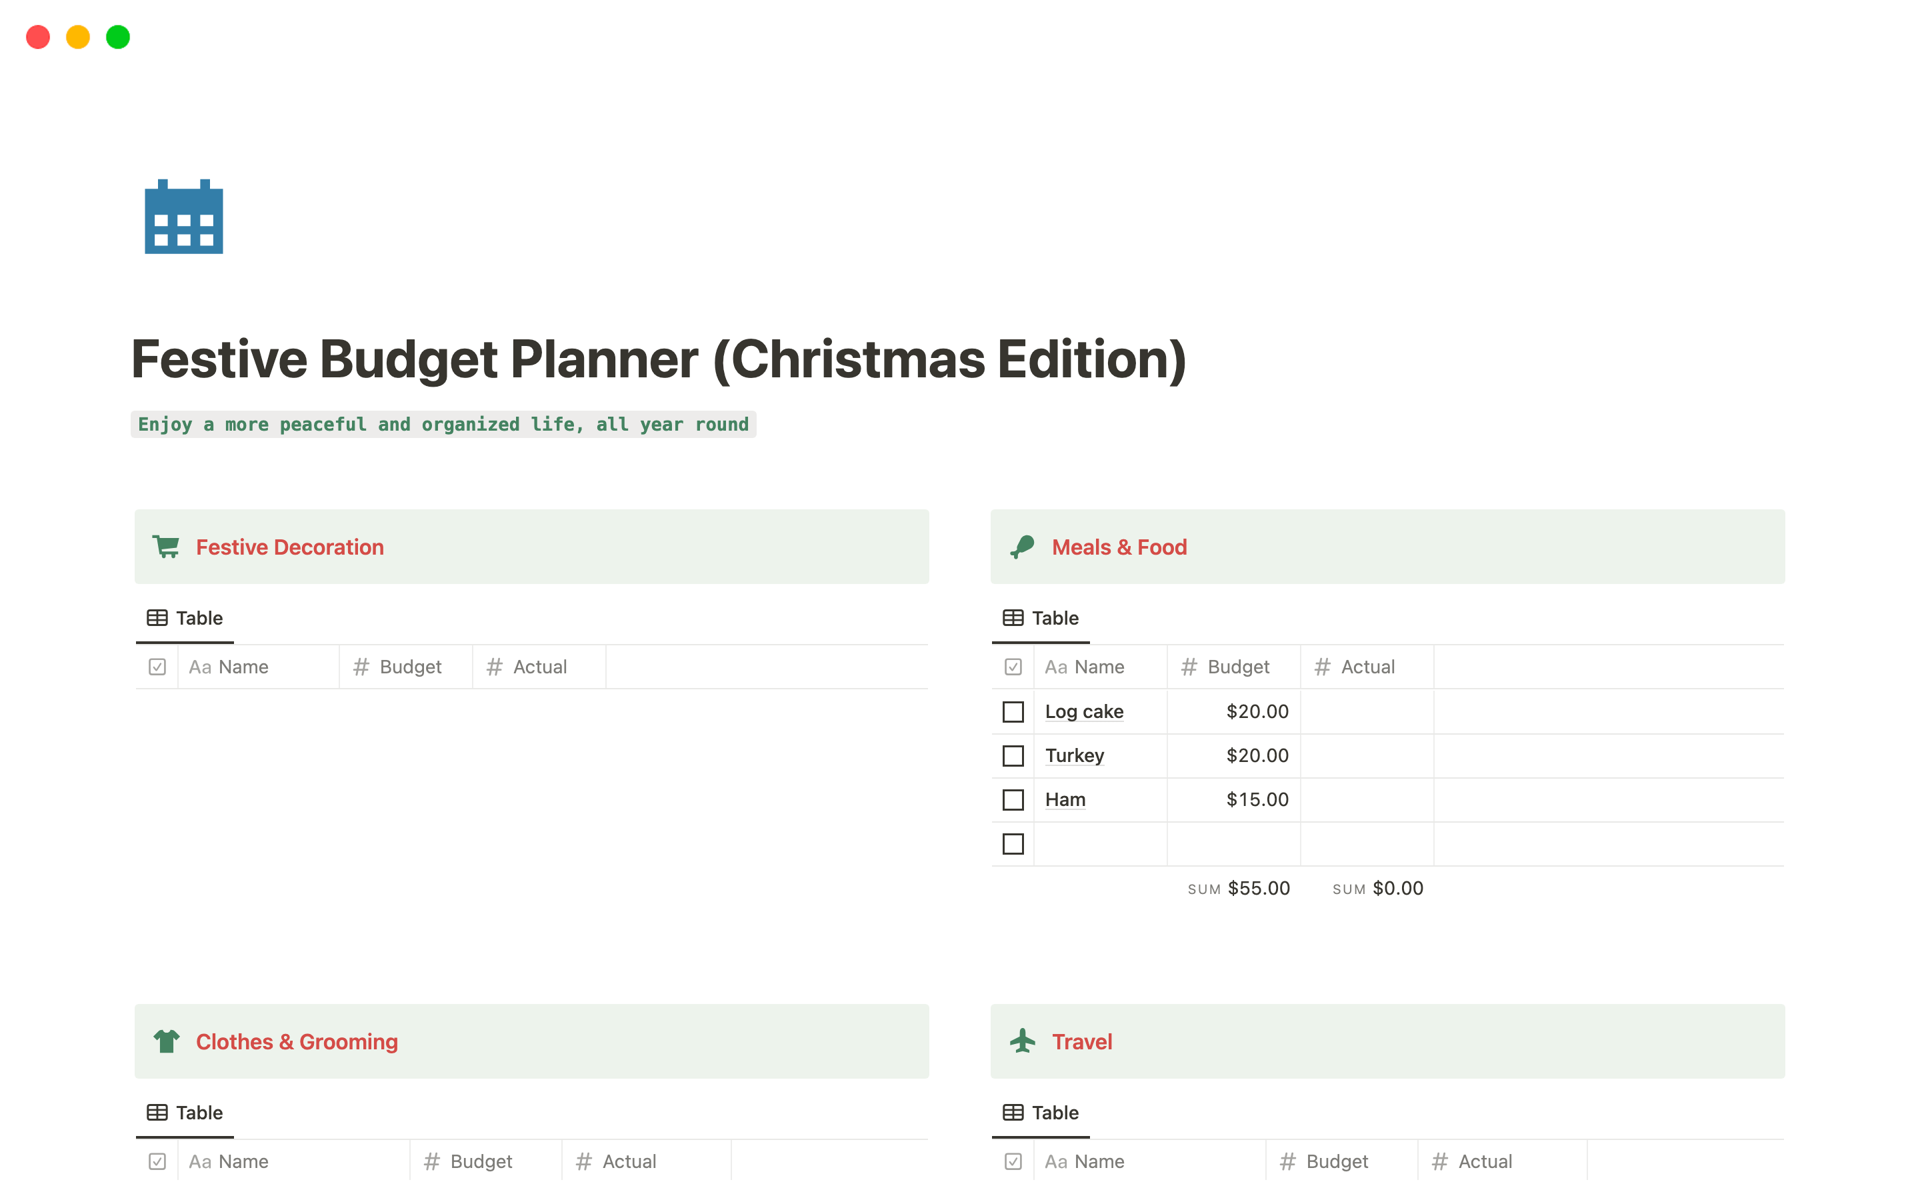 Festive Budget Planner is a management tool to make staying on budget a breeze and enables you to enjoy a stress-free holiday season.